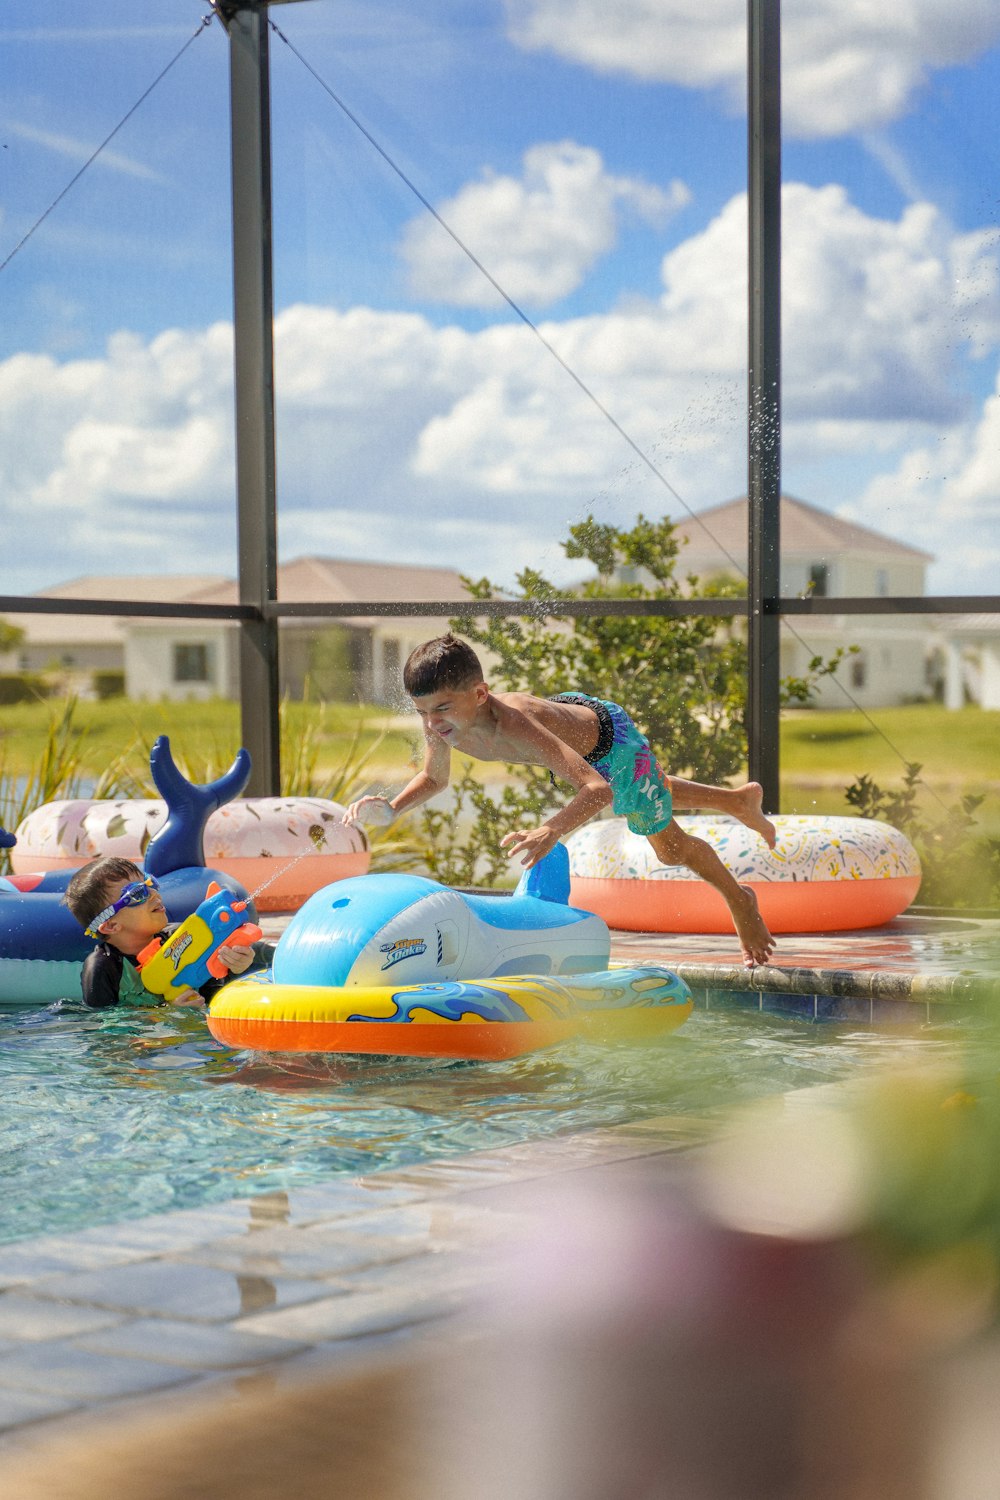 a boy is playing in a pool with inflatable toys